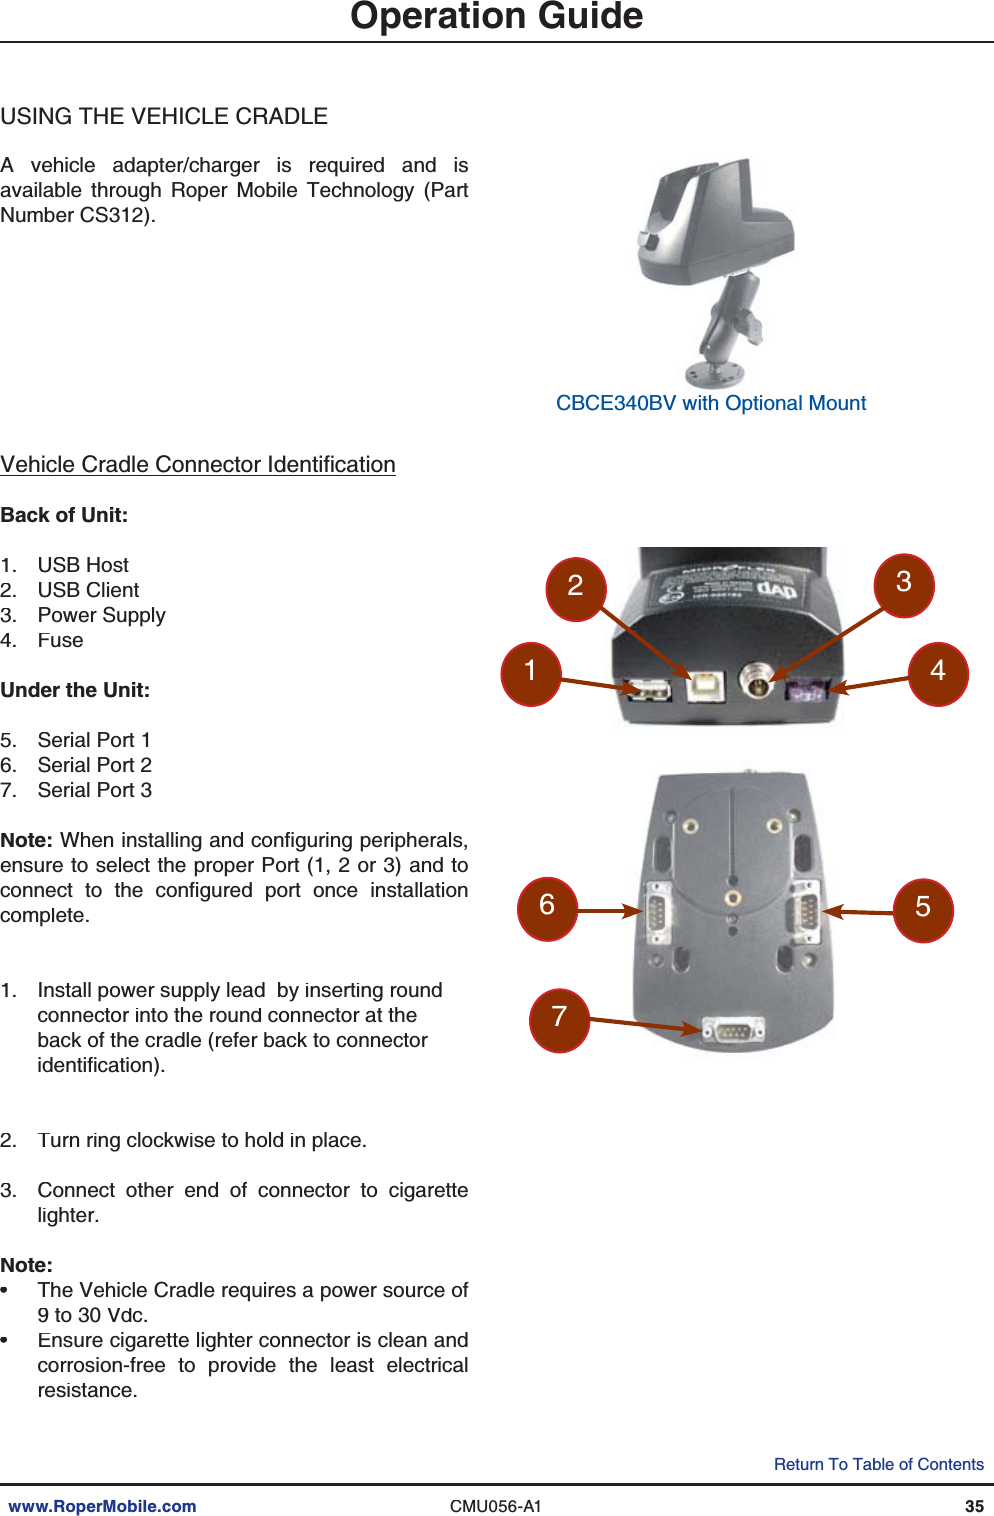 www.RoperMobile.comCMU056-A135Return To Table of ContentsOperation GuideUSINGTHE VEHICLECRADLEA vehicle adapter/charger is required and isavailable through Roper Mobile Technology (PartNumber CS312).8GJKENG%TCFNG%QPPGEVQT+FGPVKſECVKQPBack of Unit:USB HostUSB ClientPower SupplyFuseUnder the Unit:Serial Port 1Serial Port 2Serial Port 3Note:9JGPKPUVCNNKPICPFEQPſIWTKPIRGTKRJGTCNUensure to select the proper Port (1, 2 or 3) and toEQPPGEV VQ VJG EQPſIWTGF RQTV QPEG KPUVCNNCVKQPcomplete.Install power supply lead  by inserting roundconnector into the round connector at theback of the cradle (refer back to connectorKFGPVKſECVKQPTurn ring clockwise to hold in place.Connect other end of connector to cigarettelighter.Note:The Vehicle Cradle requires a power source of9 to 30 Vdc.Ensure cigarette lighter connector is clean andcorrosion-free to provide the least electricalresistance.1.2.3.4.5.6.7.1.2.3.••CBCE340BV with Optional Mount7564321